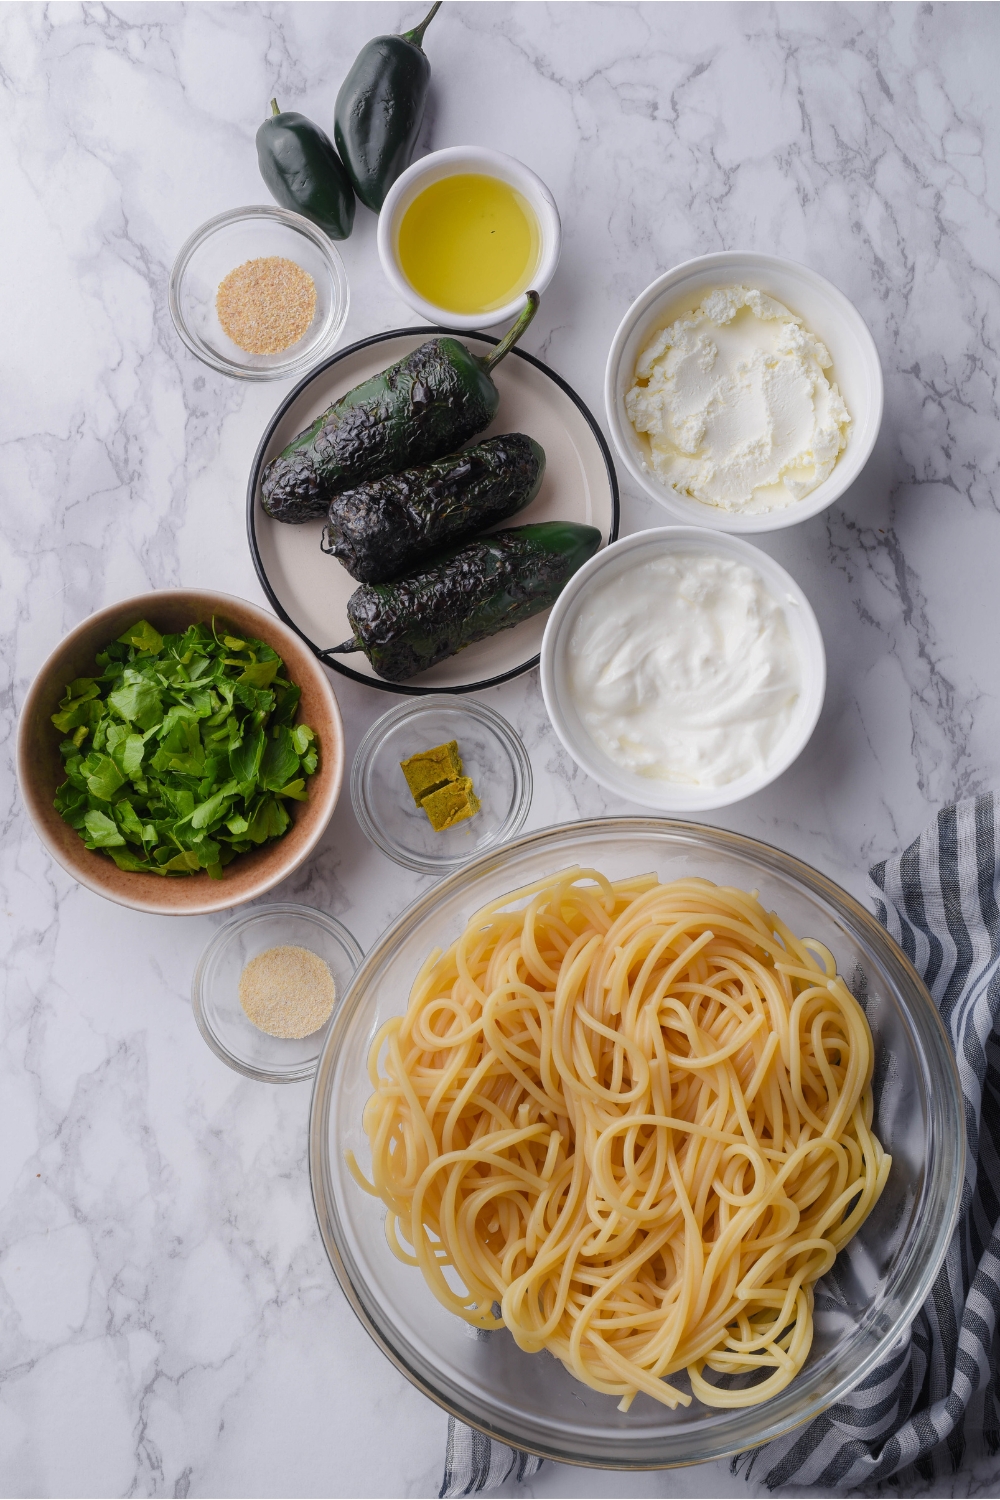 An assortment of ingredients including bowls of cream cheese, sour cream, diced green onion, cooked spaghetti noodles, and a plate of roasted jalapeños.